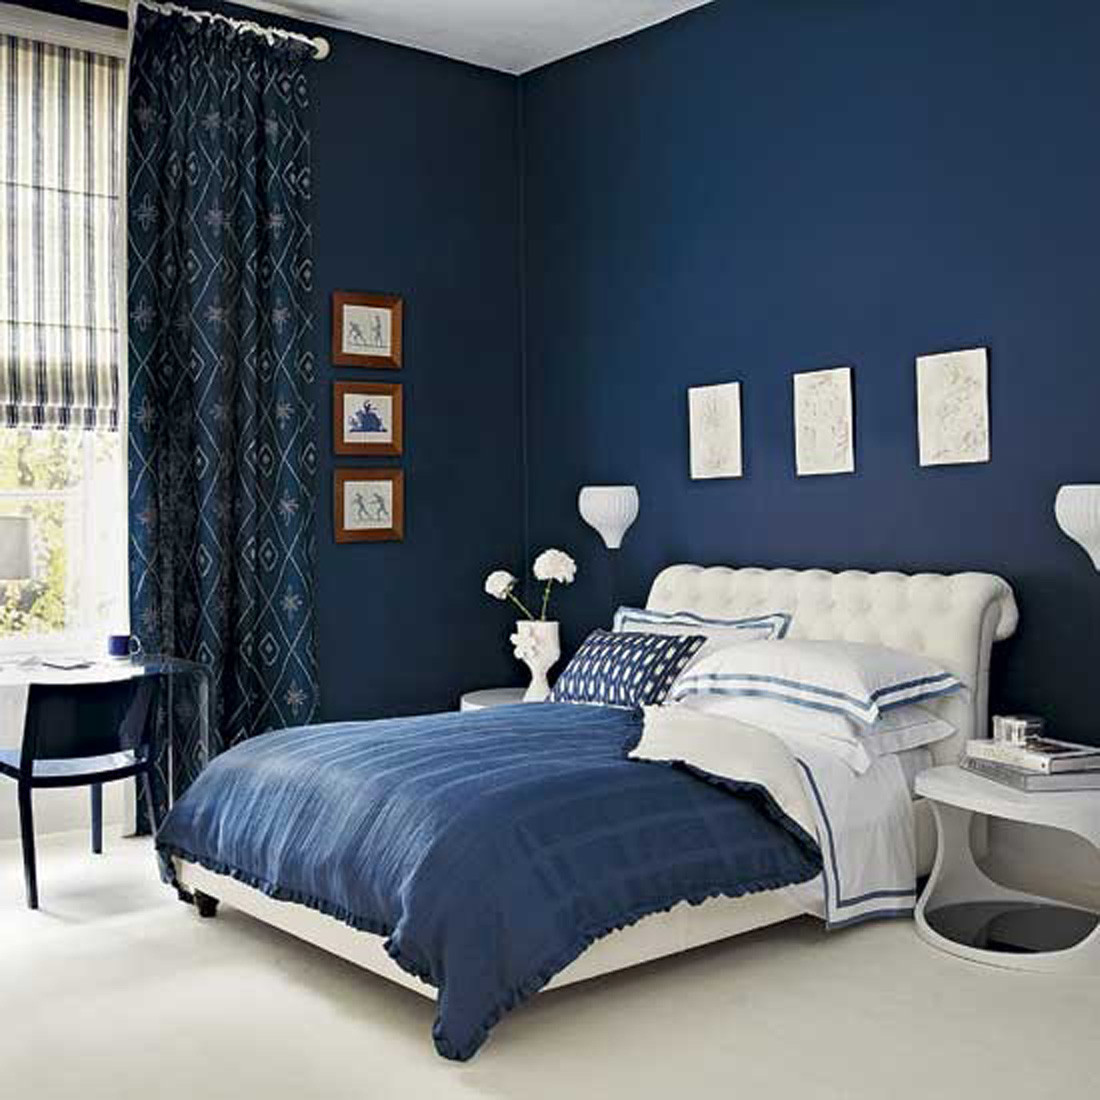 Painting For Bedroom
 15 Beautiful Dark Blue Wall Design Ideas